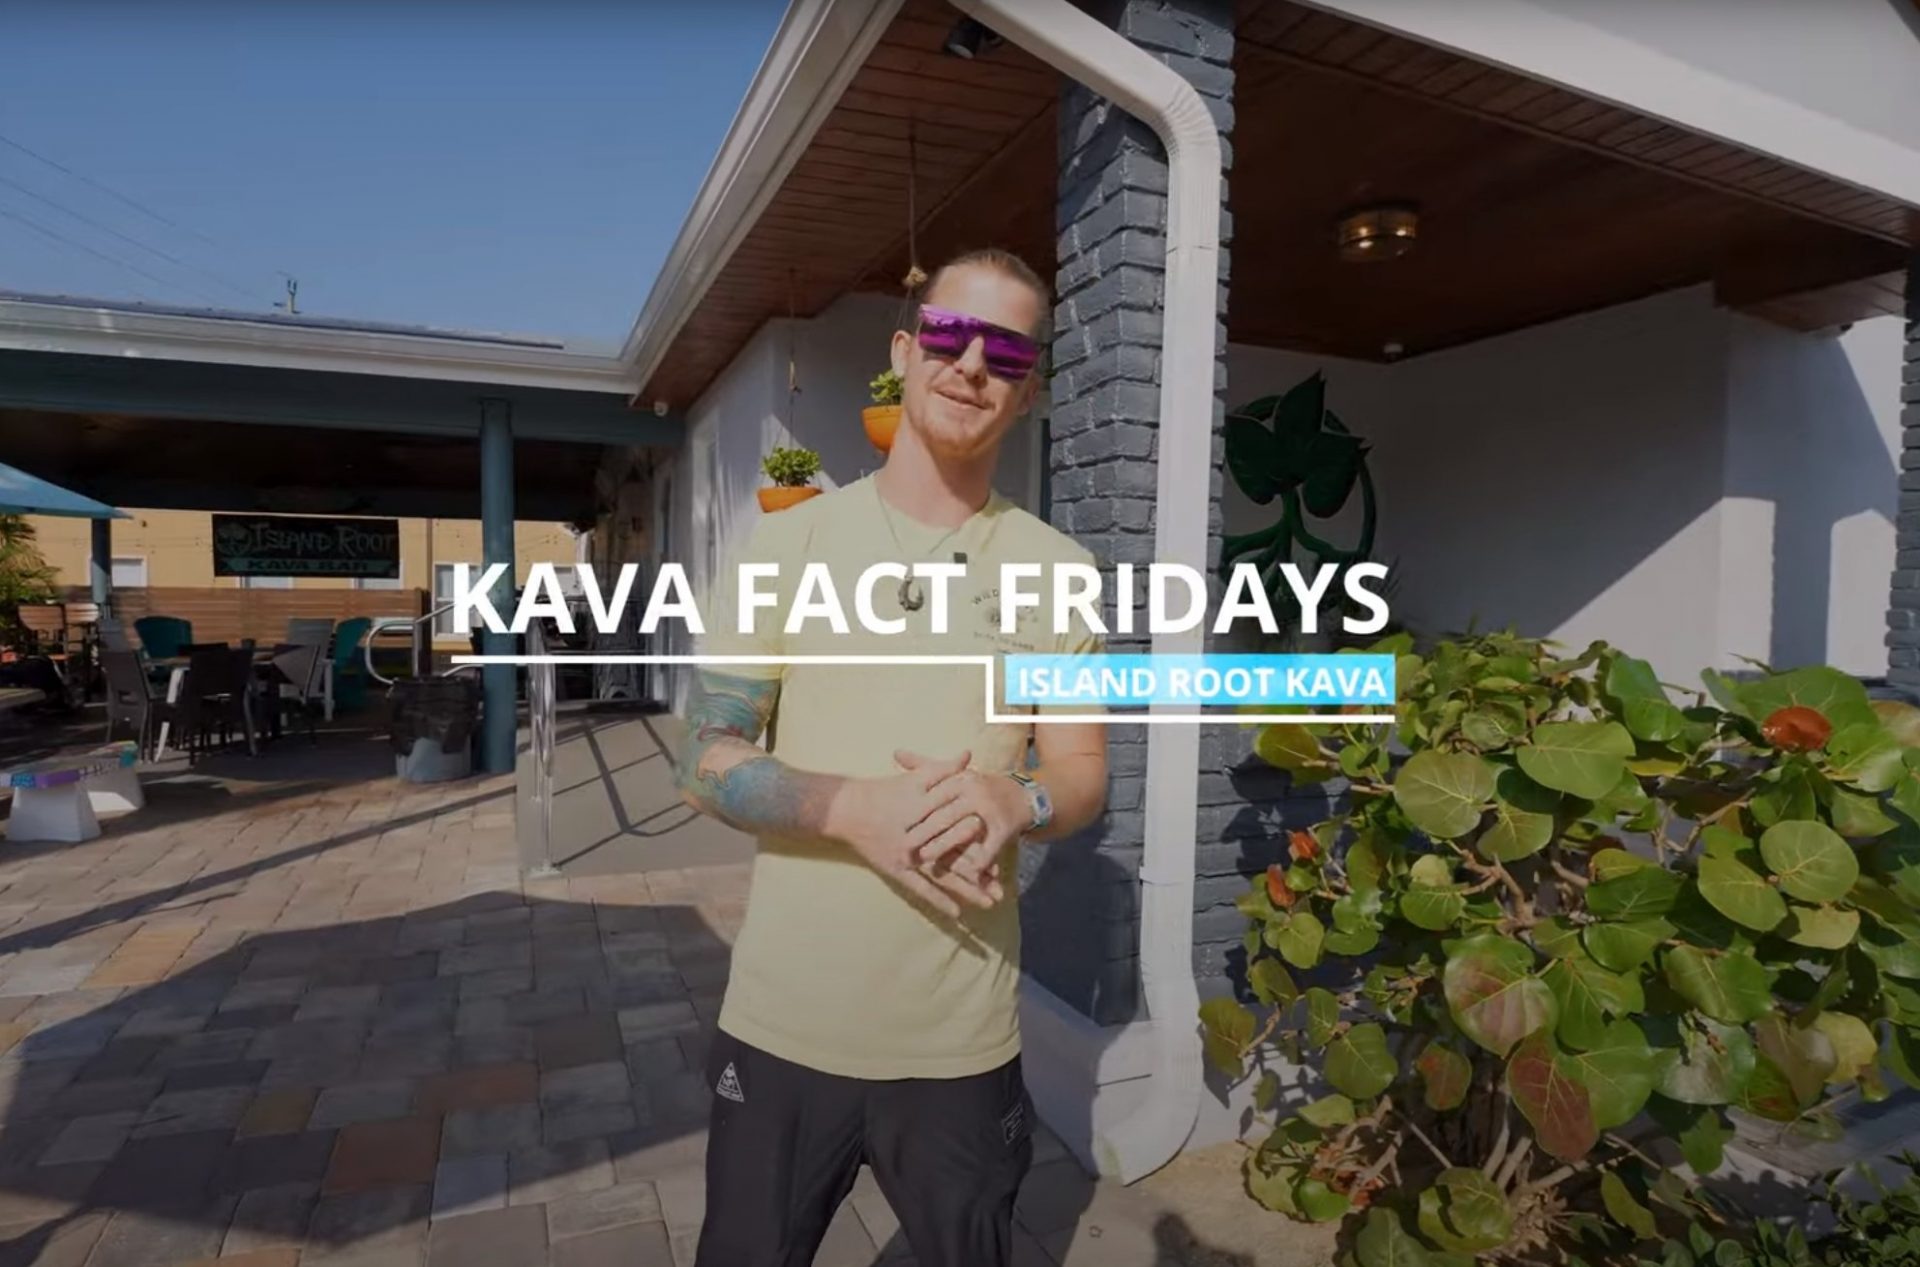 Kava Facts #5